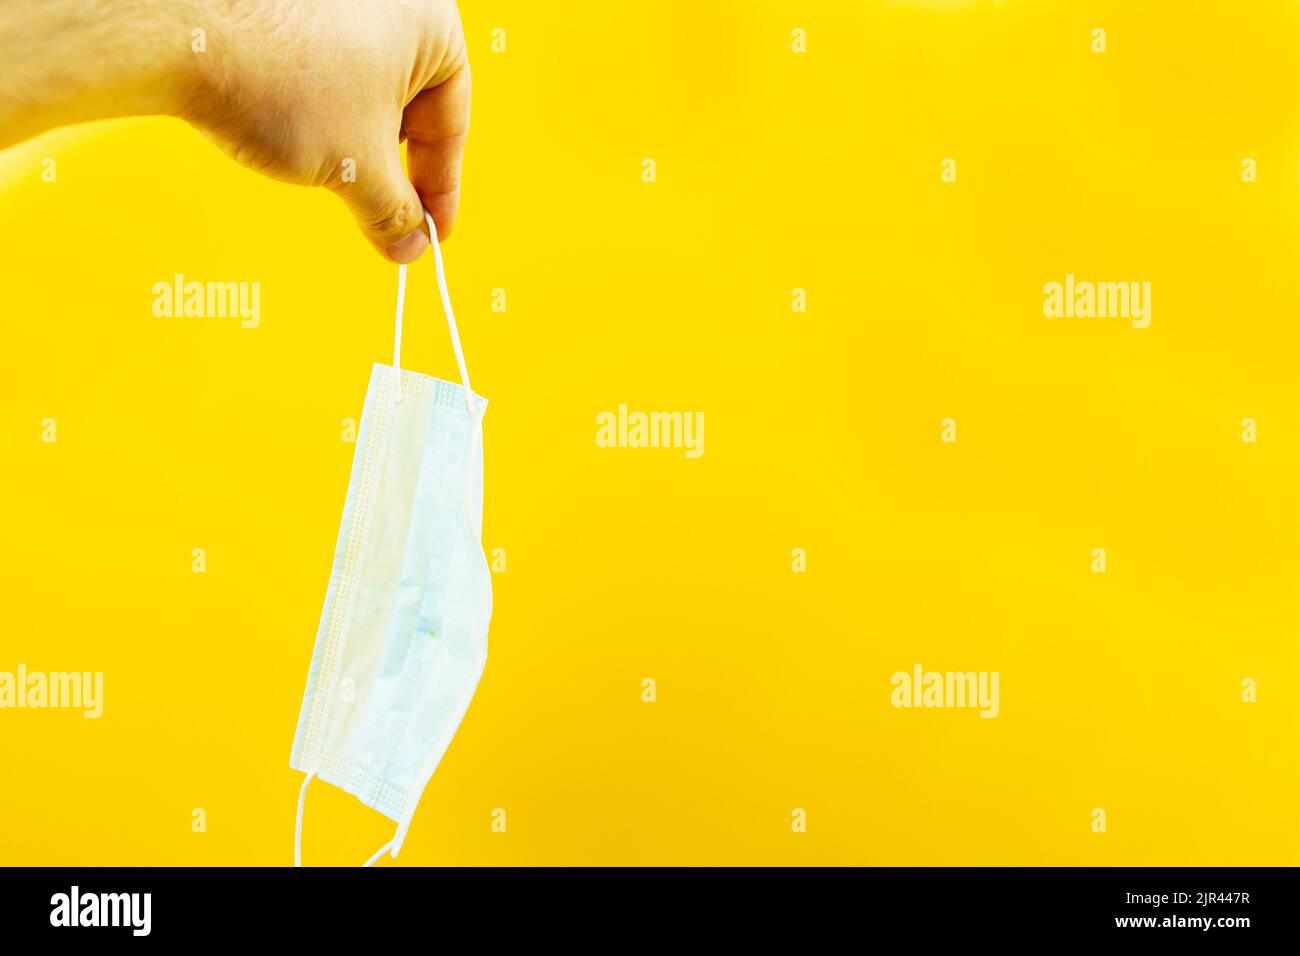 A hand holding a medical protective mask on a yellow background. Virus protection. An epidemic. Stock Photo